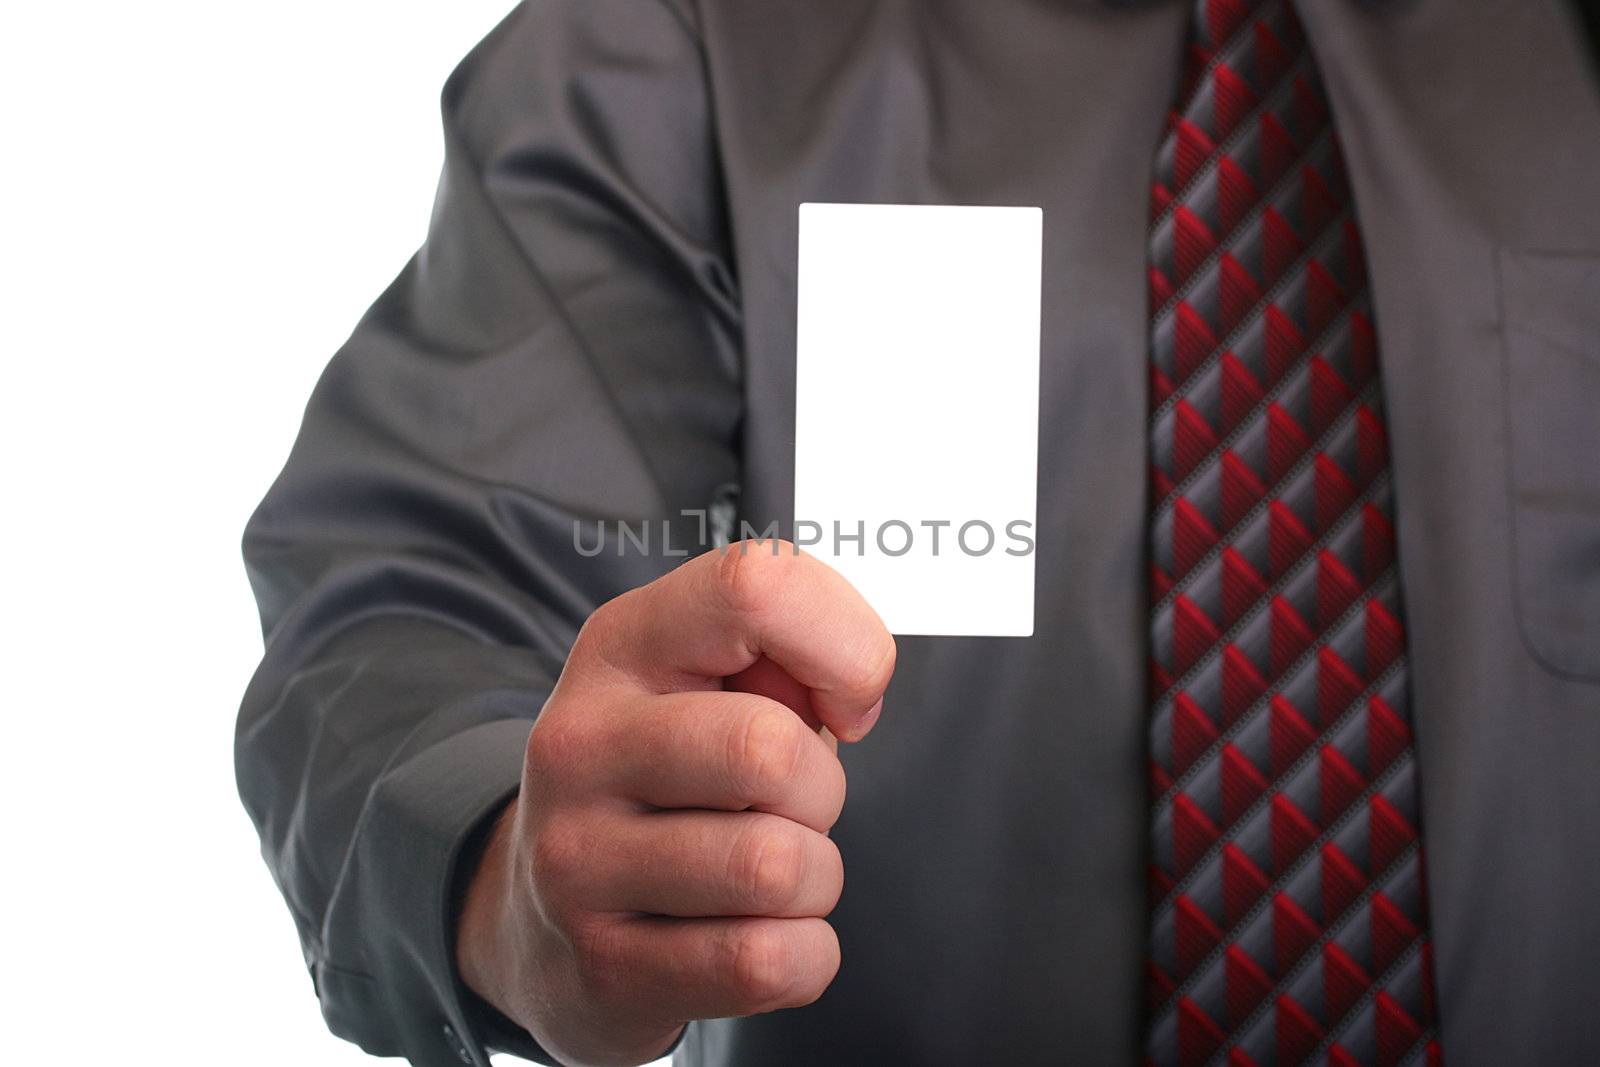 The businessman in a grey shirt and a tie stretches out a business card.